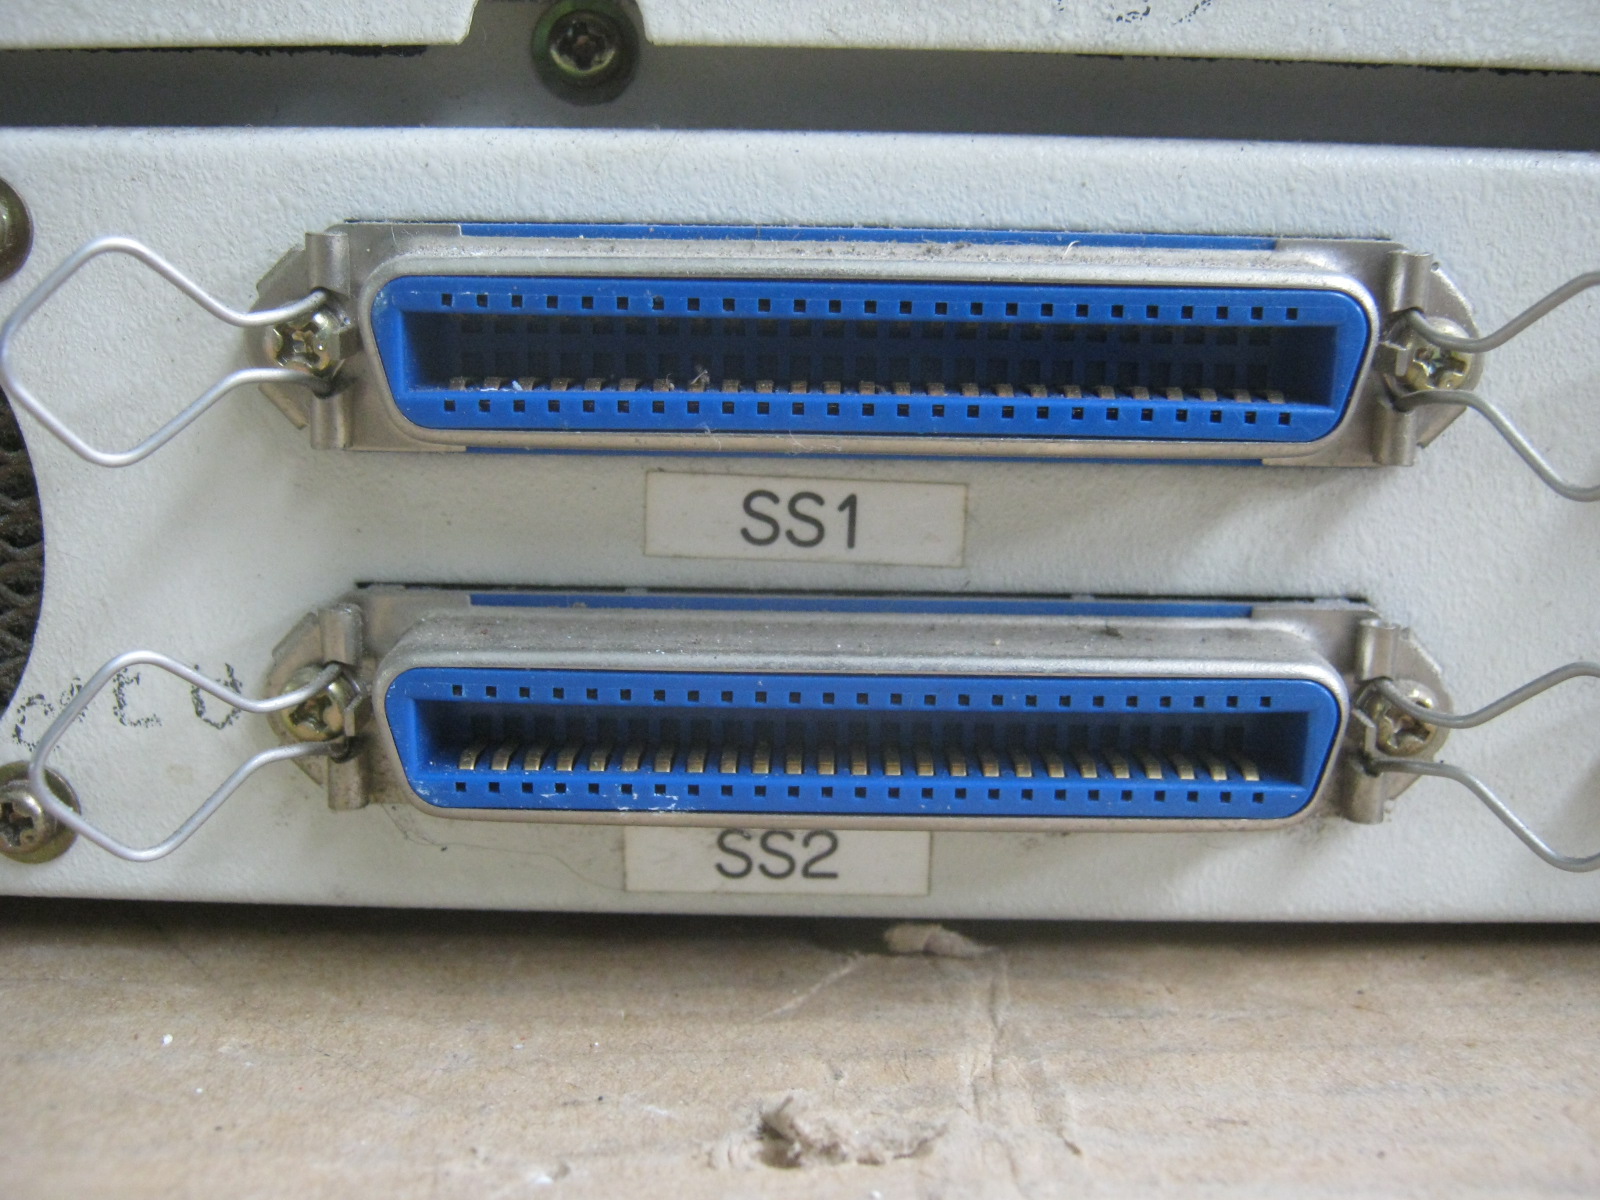 http://museodelcomputer.org/parts/screen/SG_SCSI_IN/IMG_1741.JPG